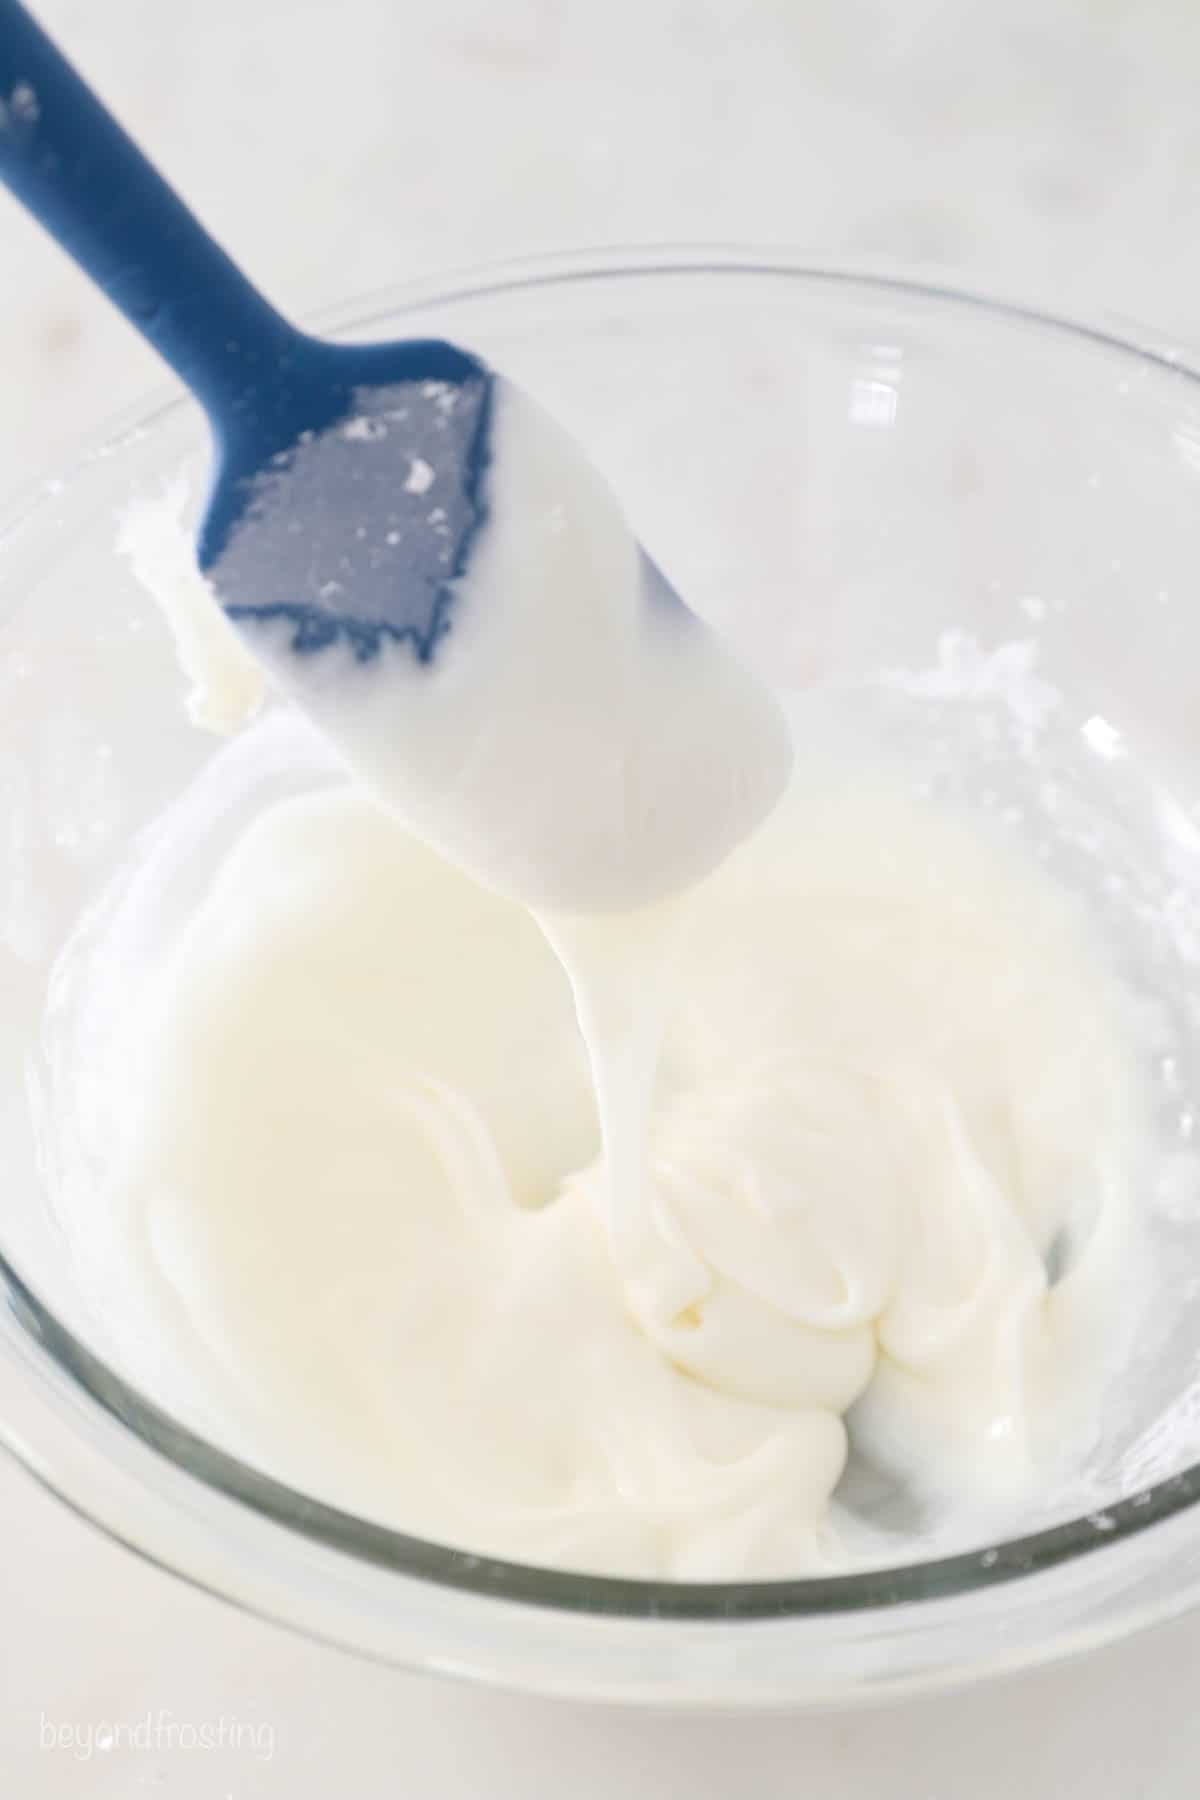 A batch of icing in a large glass bowl with a rubber spatula scooping some out